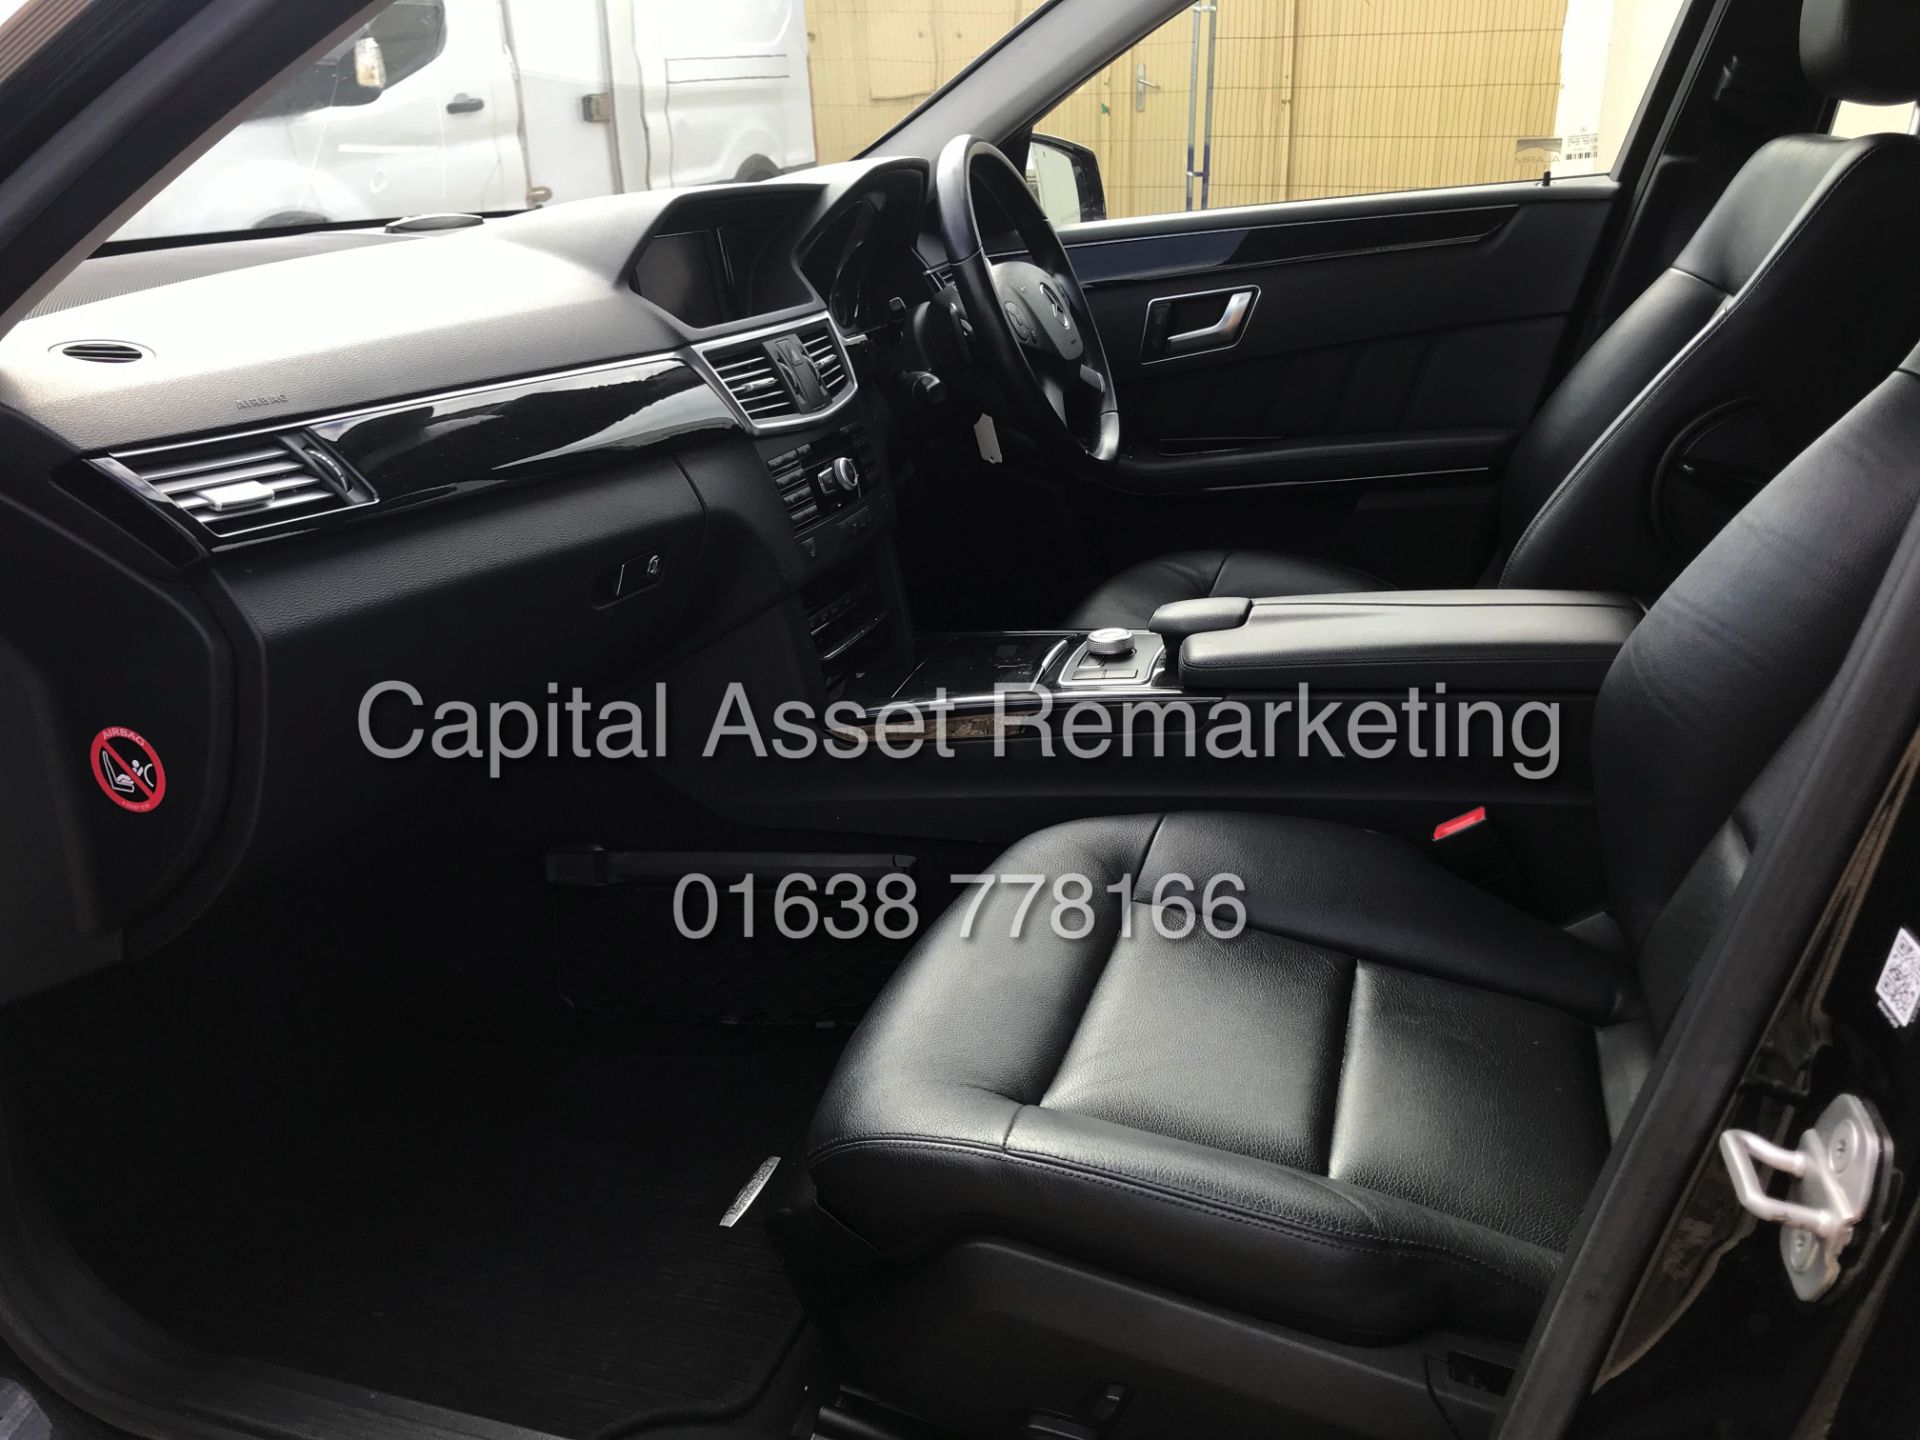 MERCEDES E220d 7G AUTO "EXECUTIVE - SPECIAL EQUIPMENT" SAT NAV - LEATHER - CLIMATE - CRUISE - Image 12 of 20